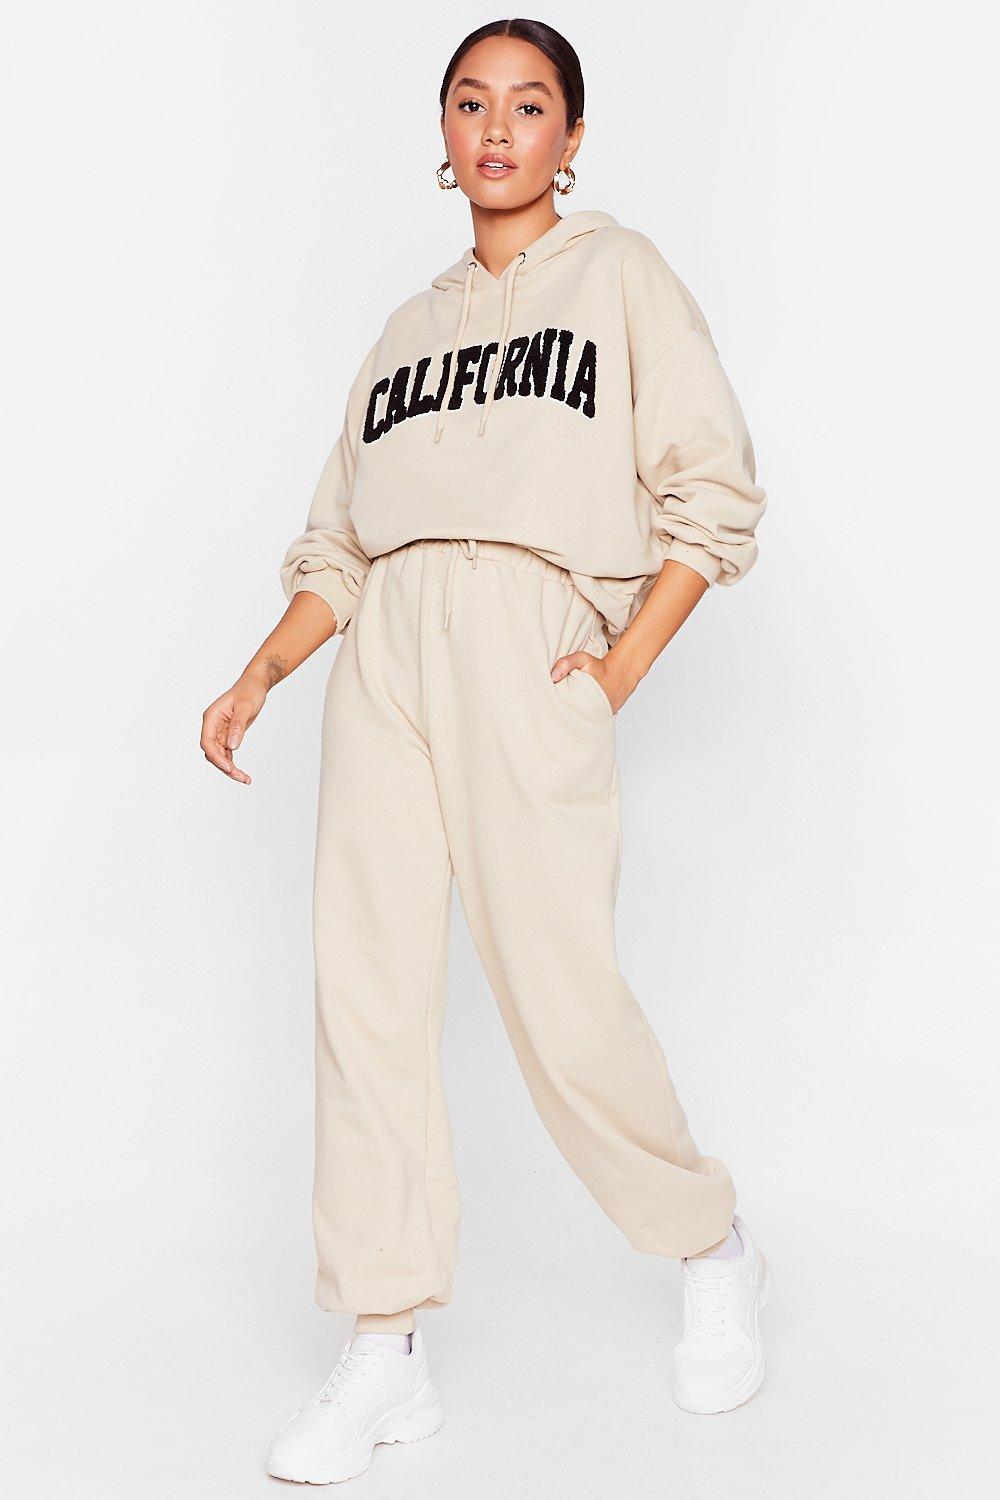 California Graphic Oversized Hoodie and Sweatpants Set